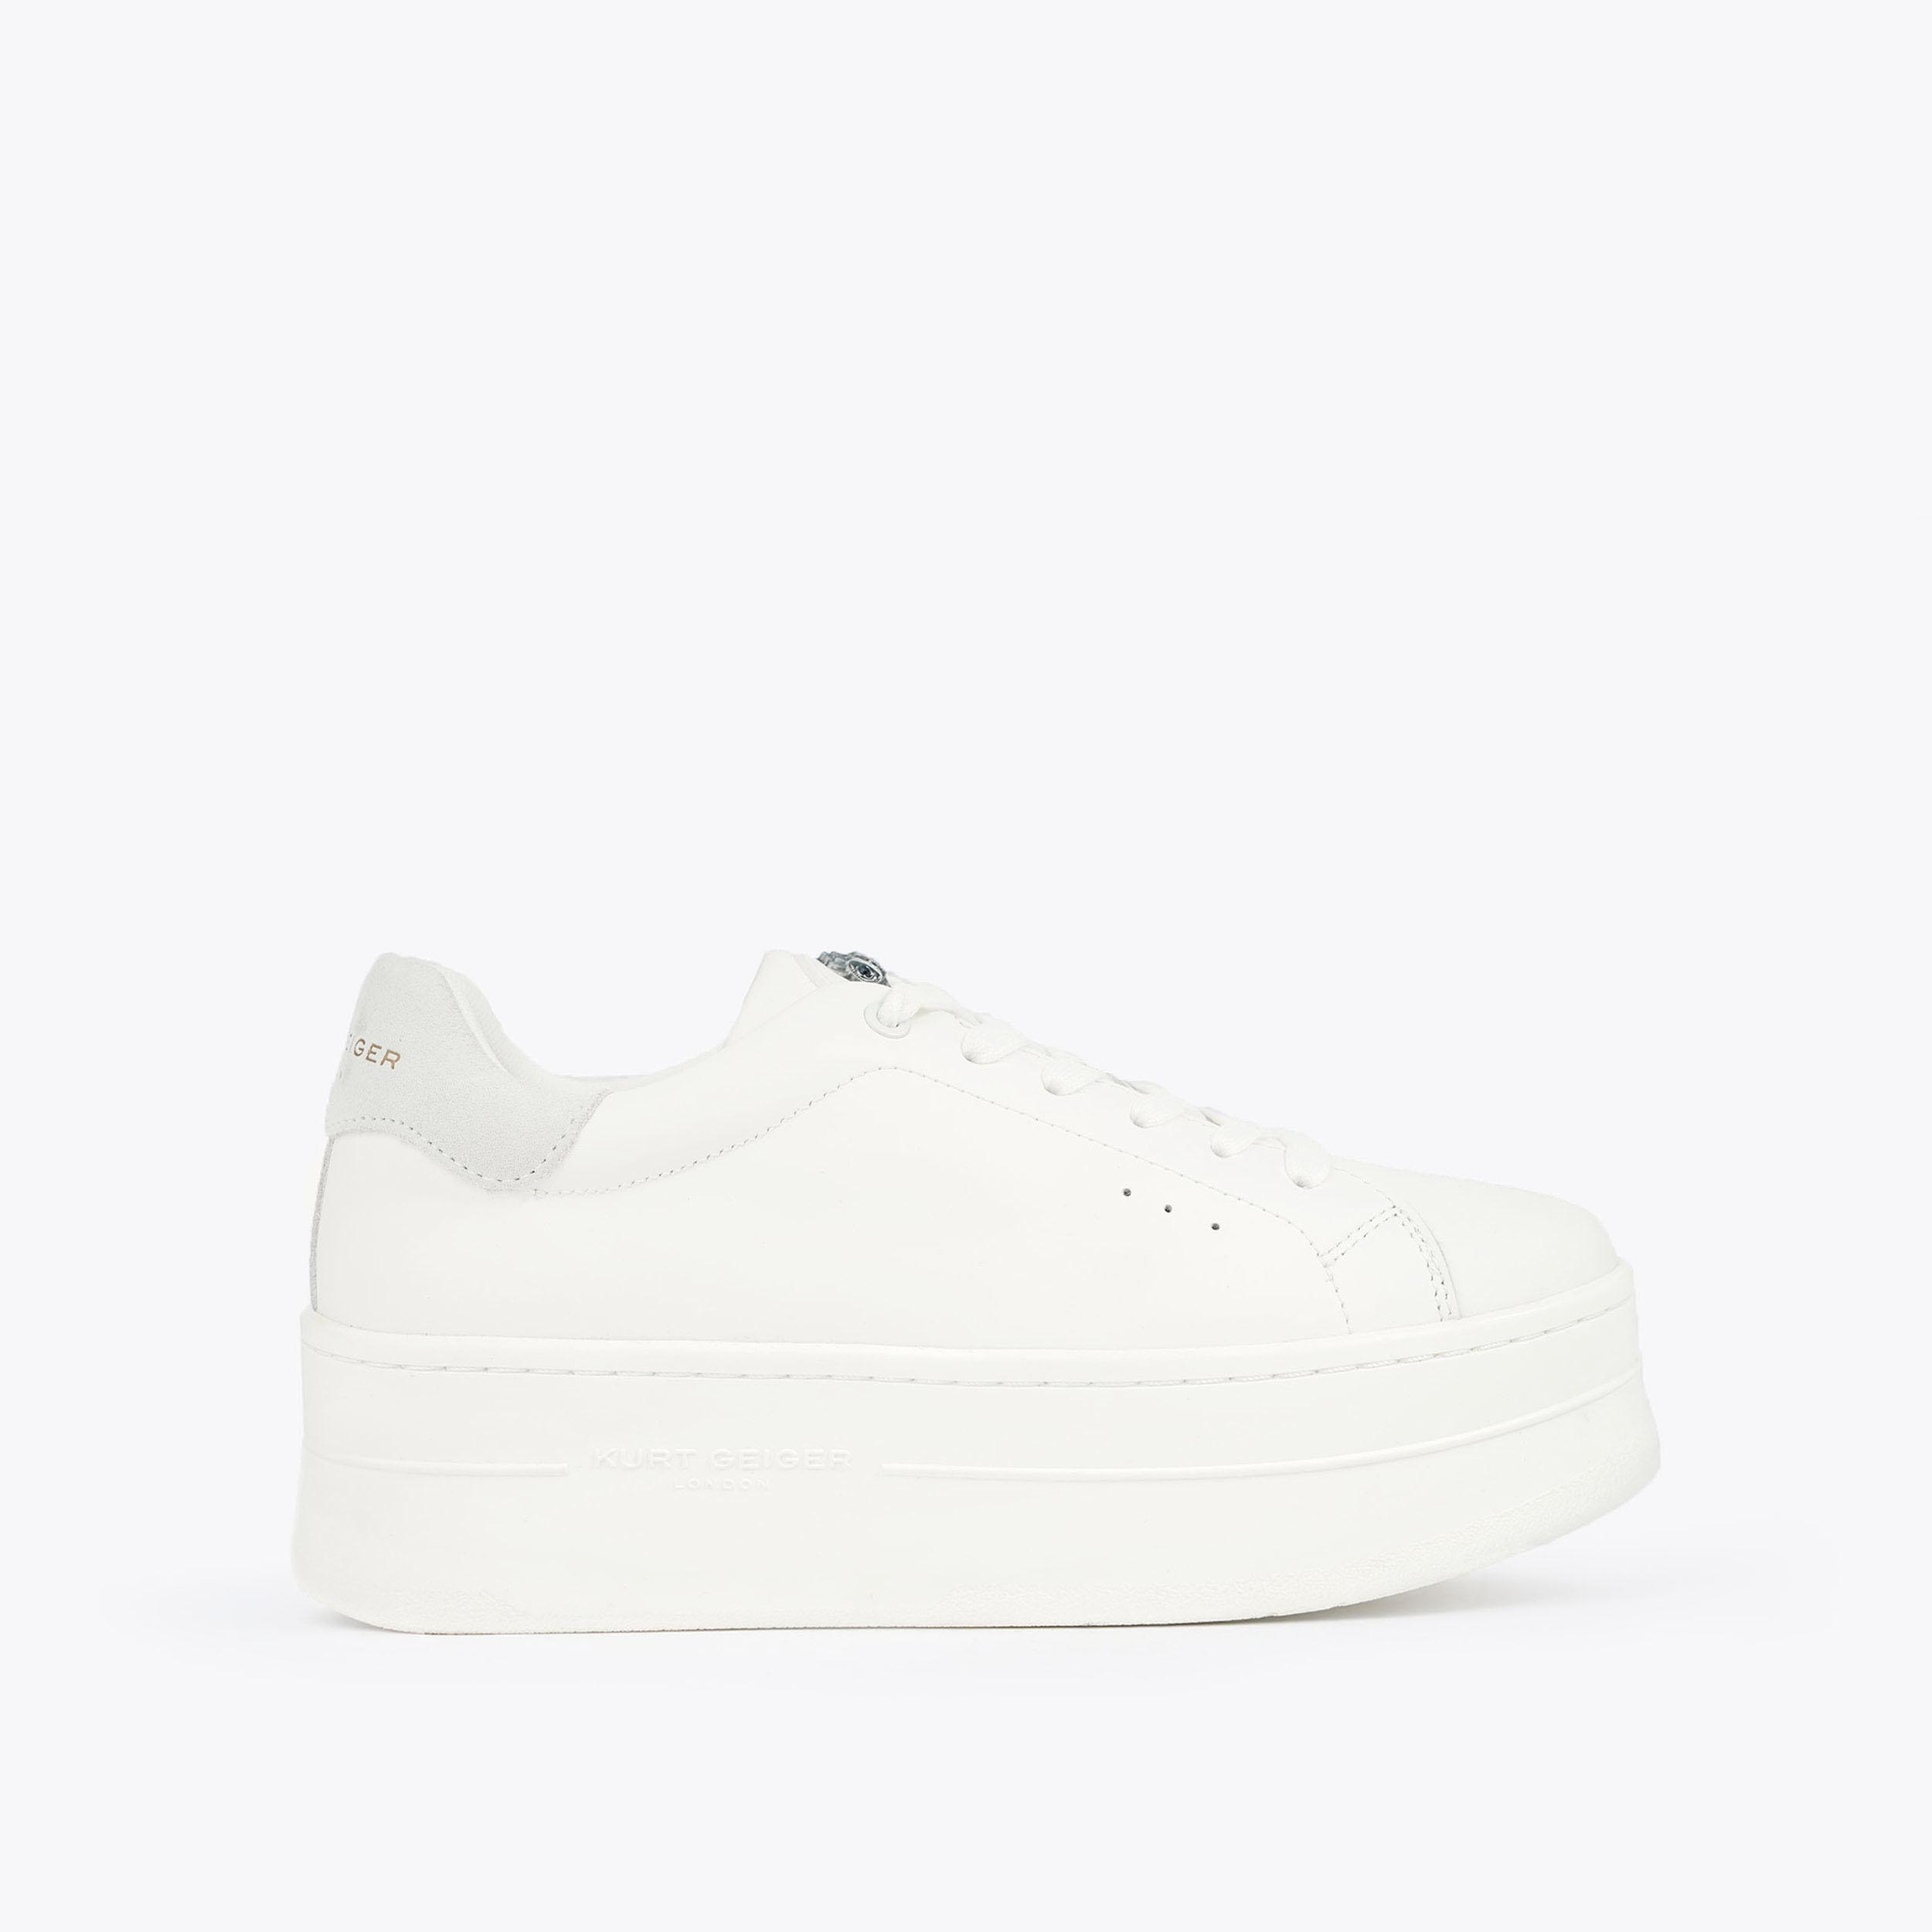 LANEY PUMPED White Leather Sneakers by KURT GEIGER LONDON